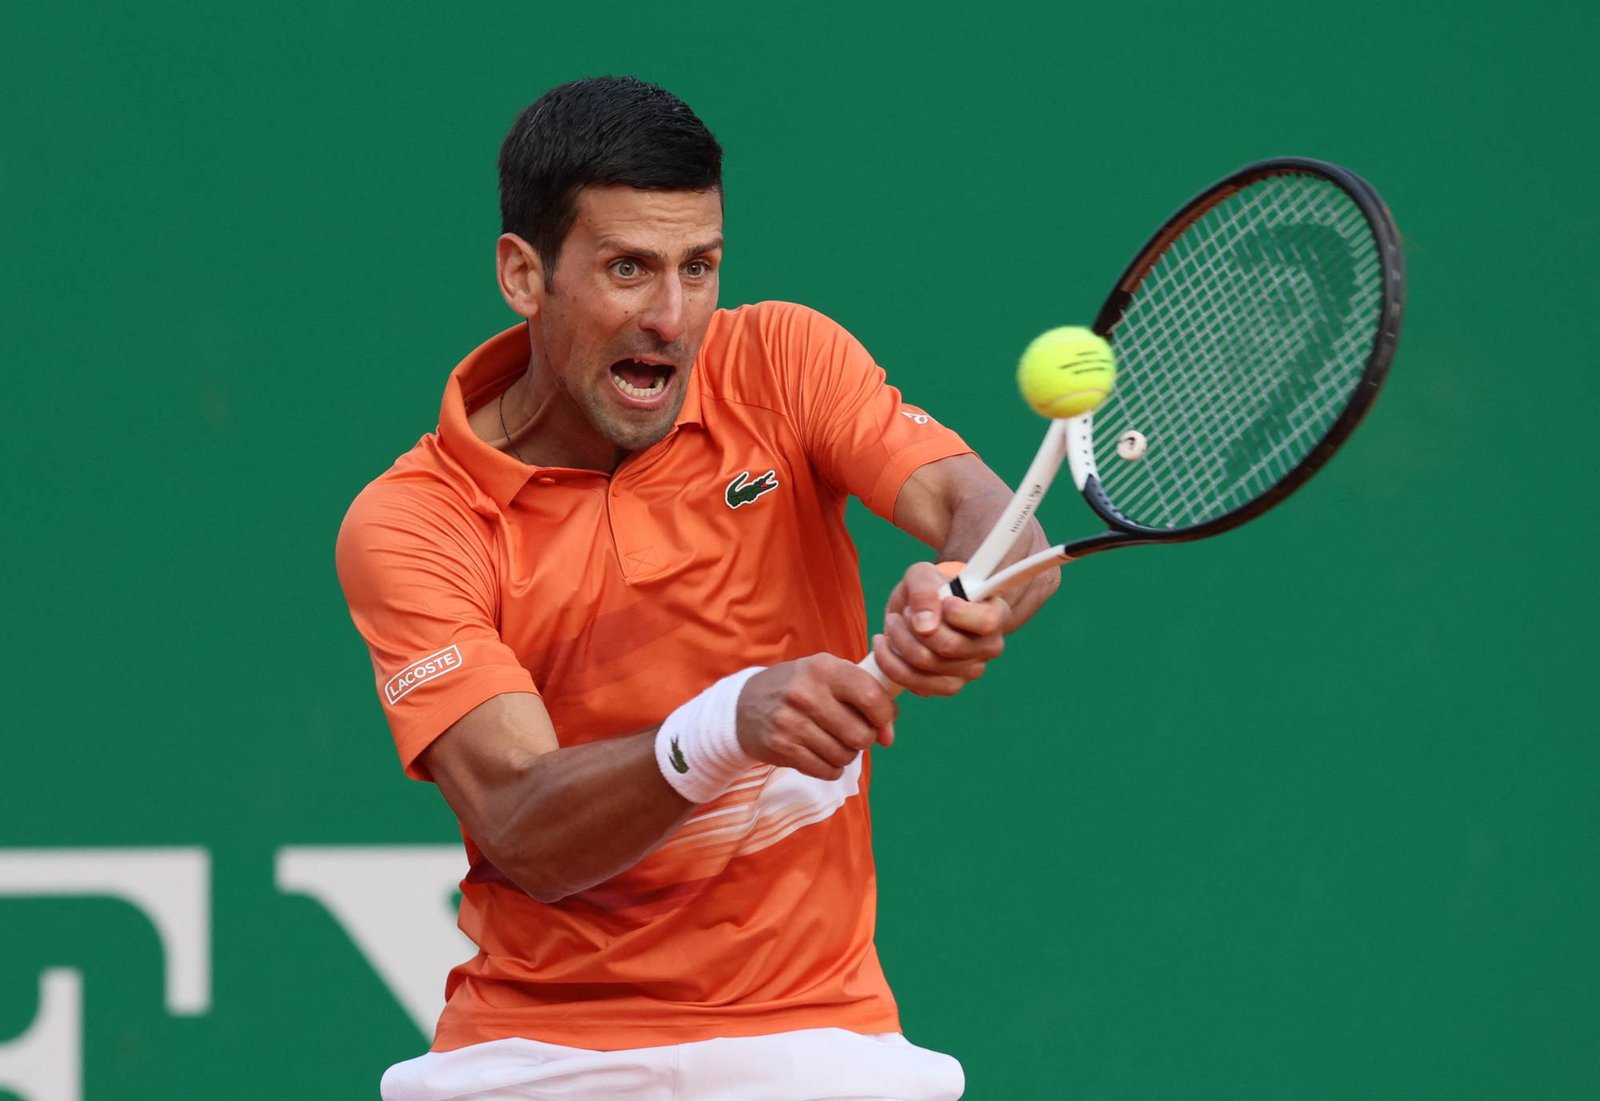 Novak Djokovic lost his first match at Monte Carlo Masters